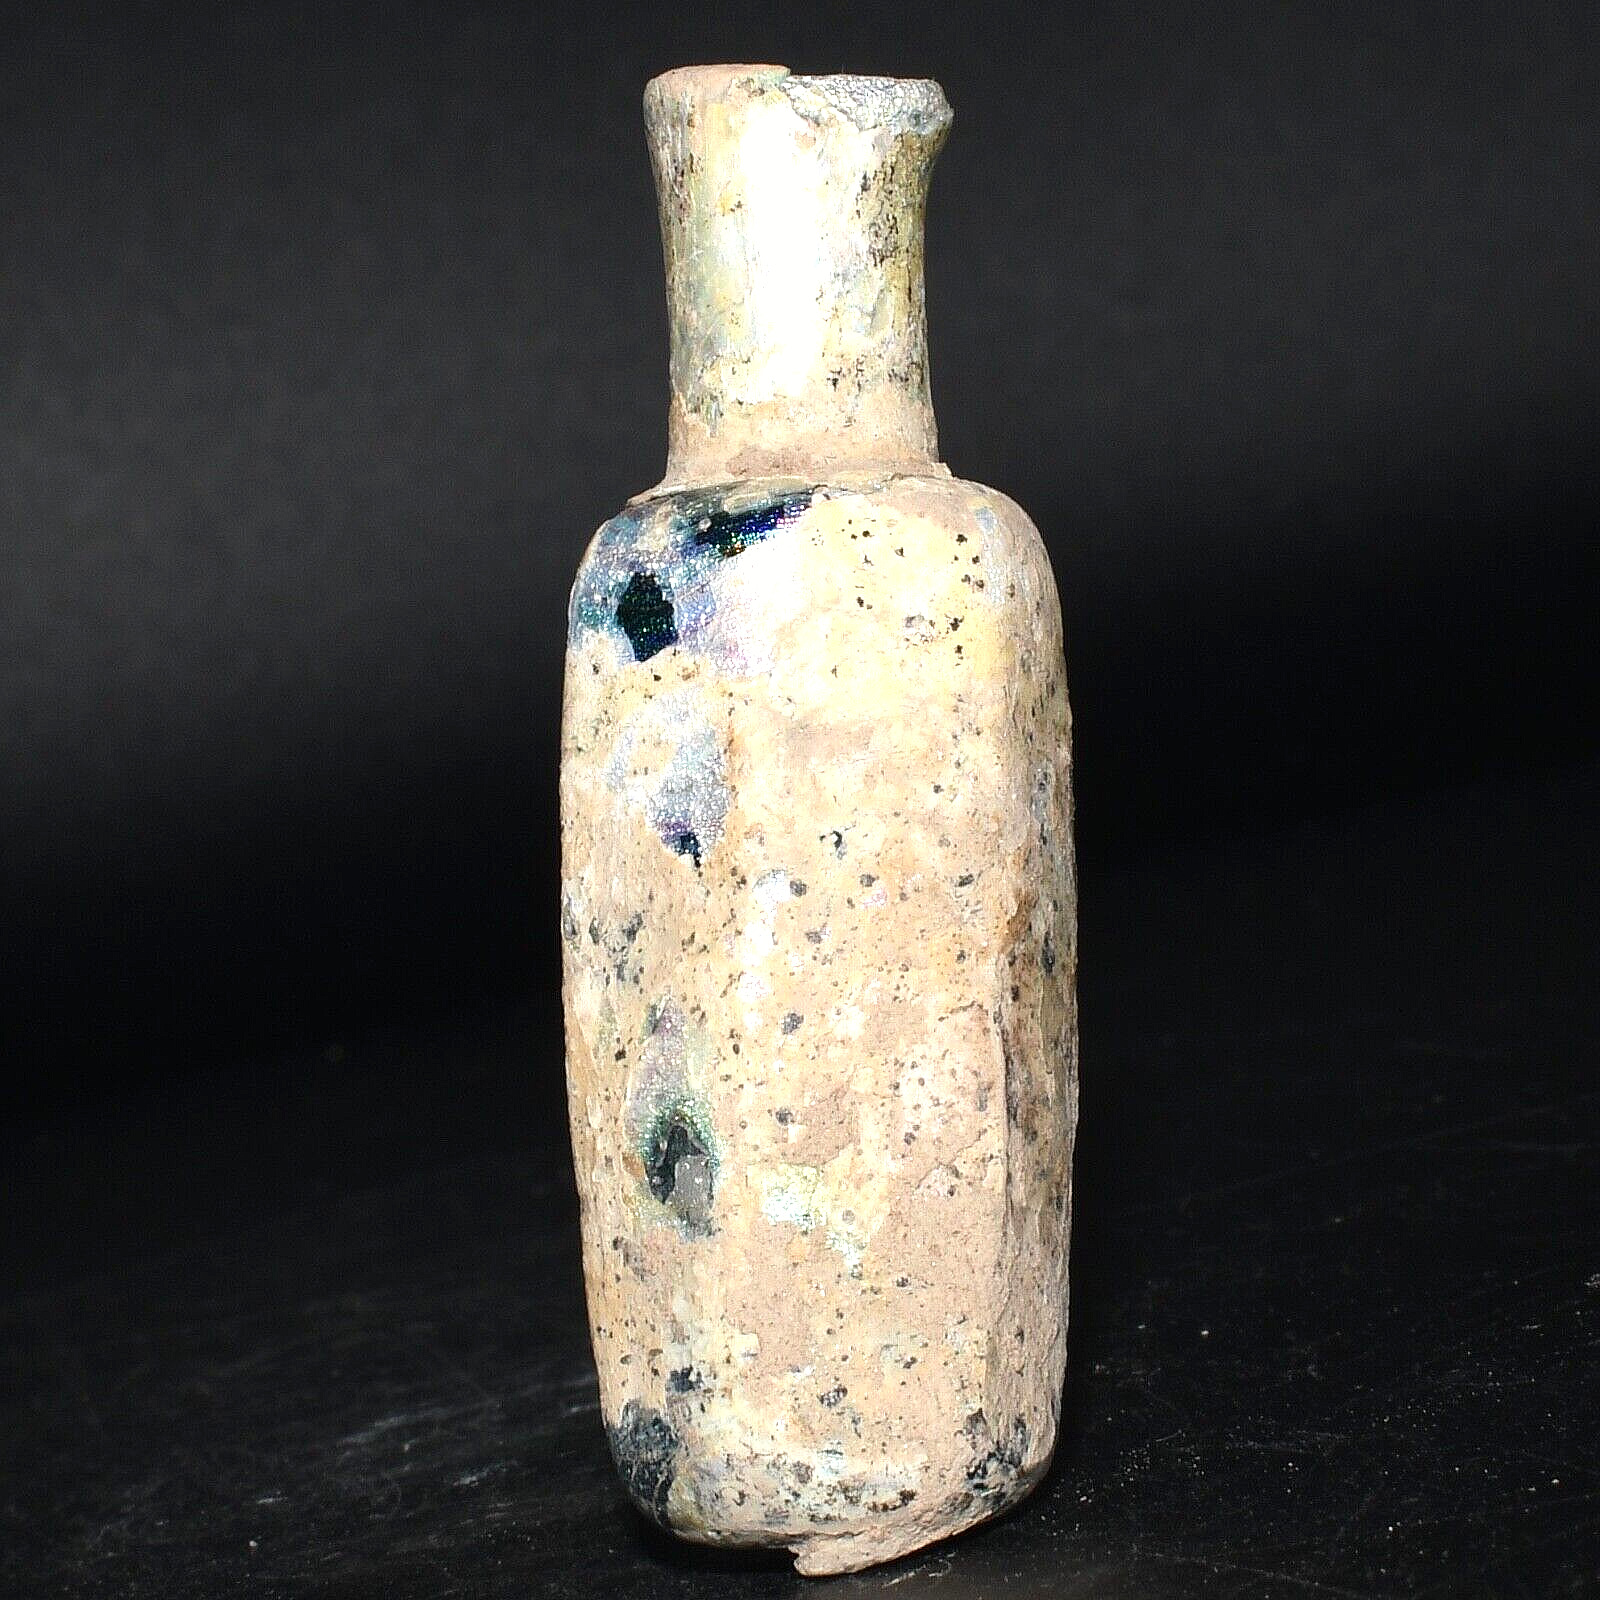 Intact Ancient Roman Glass Bottle Vial with Iridescent Patina Ca. 1st Century AD